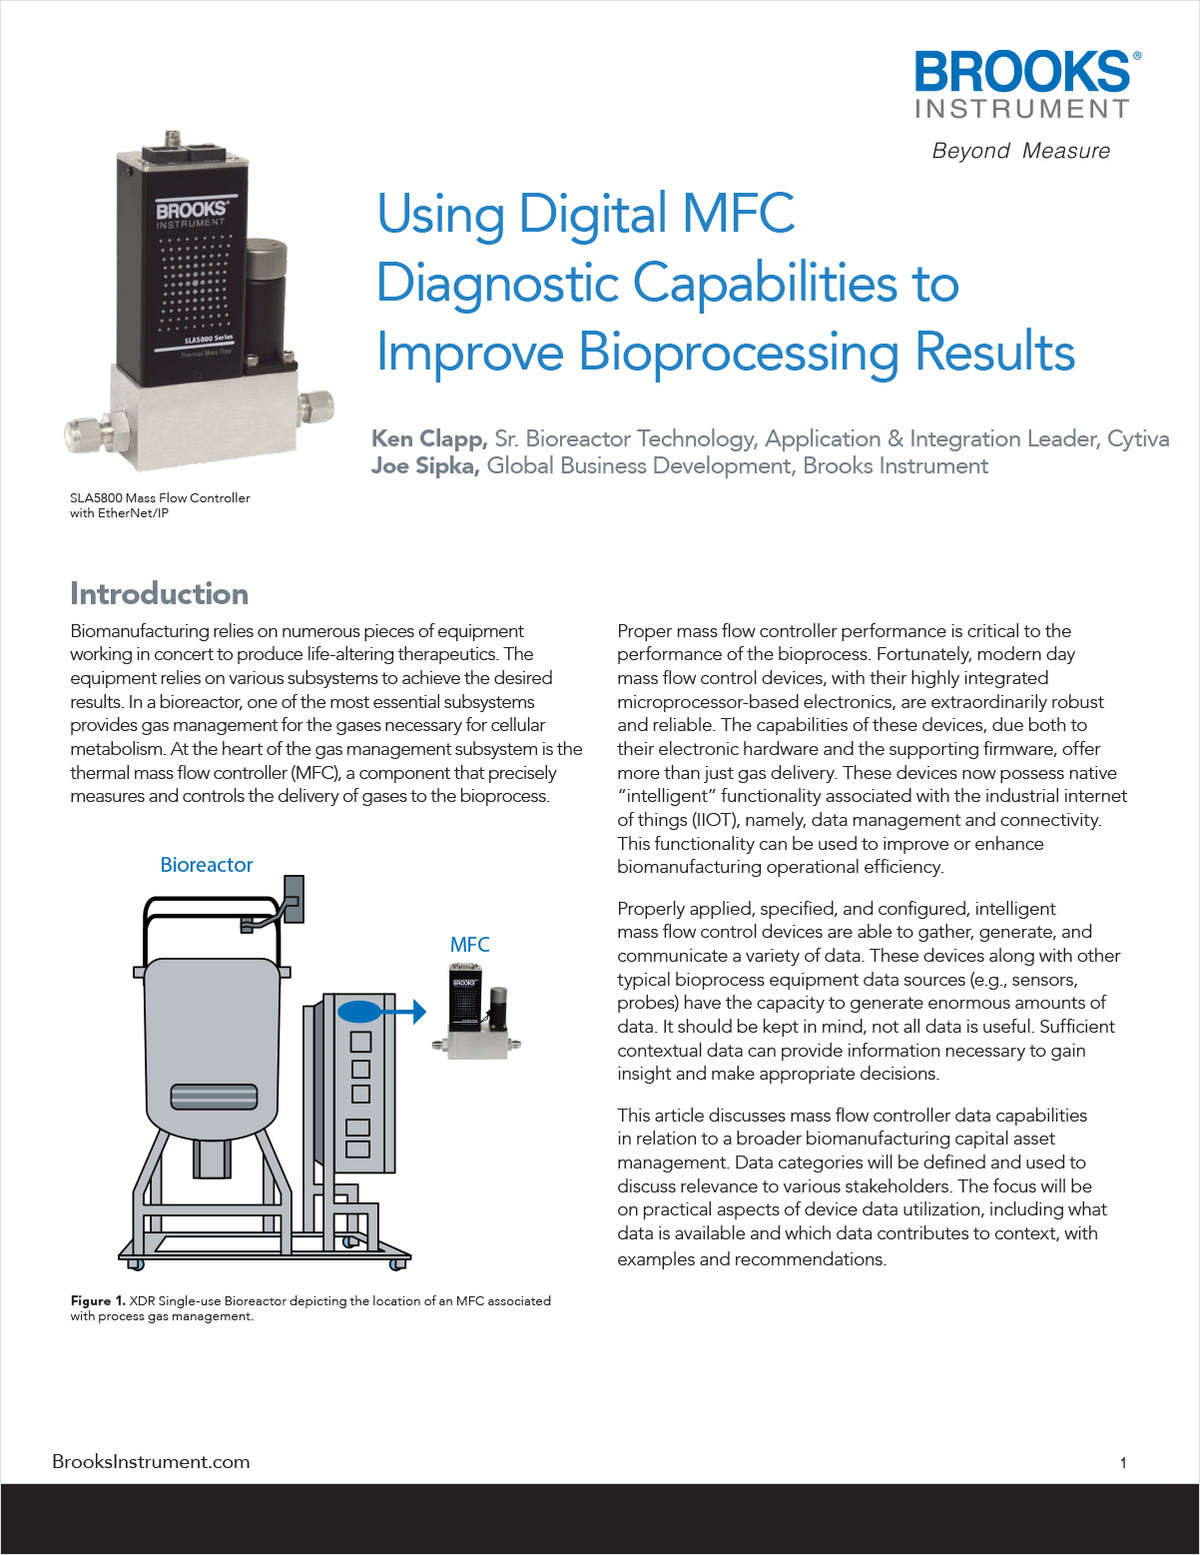 White paper: How Digital Mass Flow Controllers Improve Bioprocessing Results